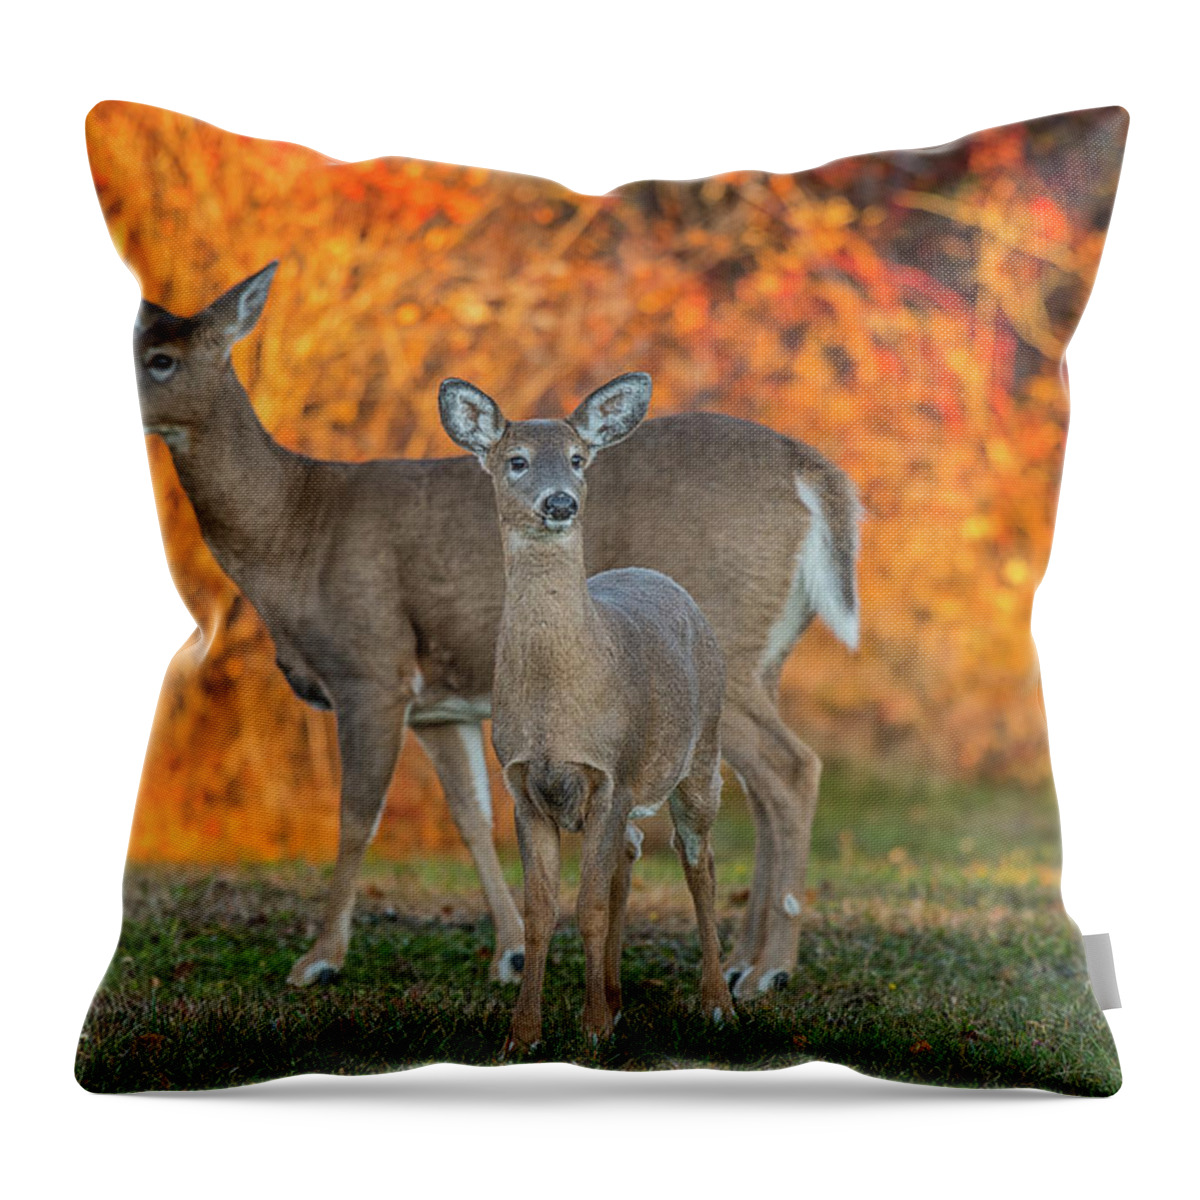 Deer Throw Pillow featuring the photograph Acadia Deer by Darren White